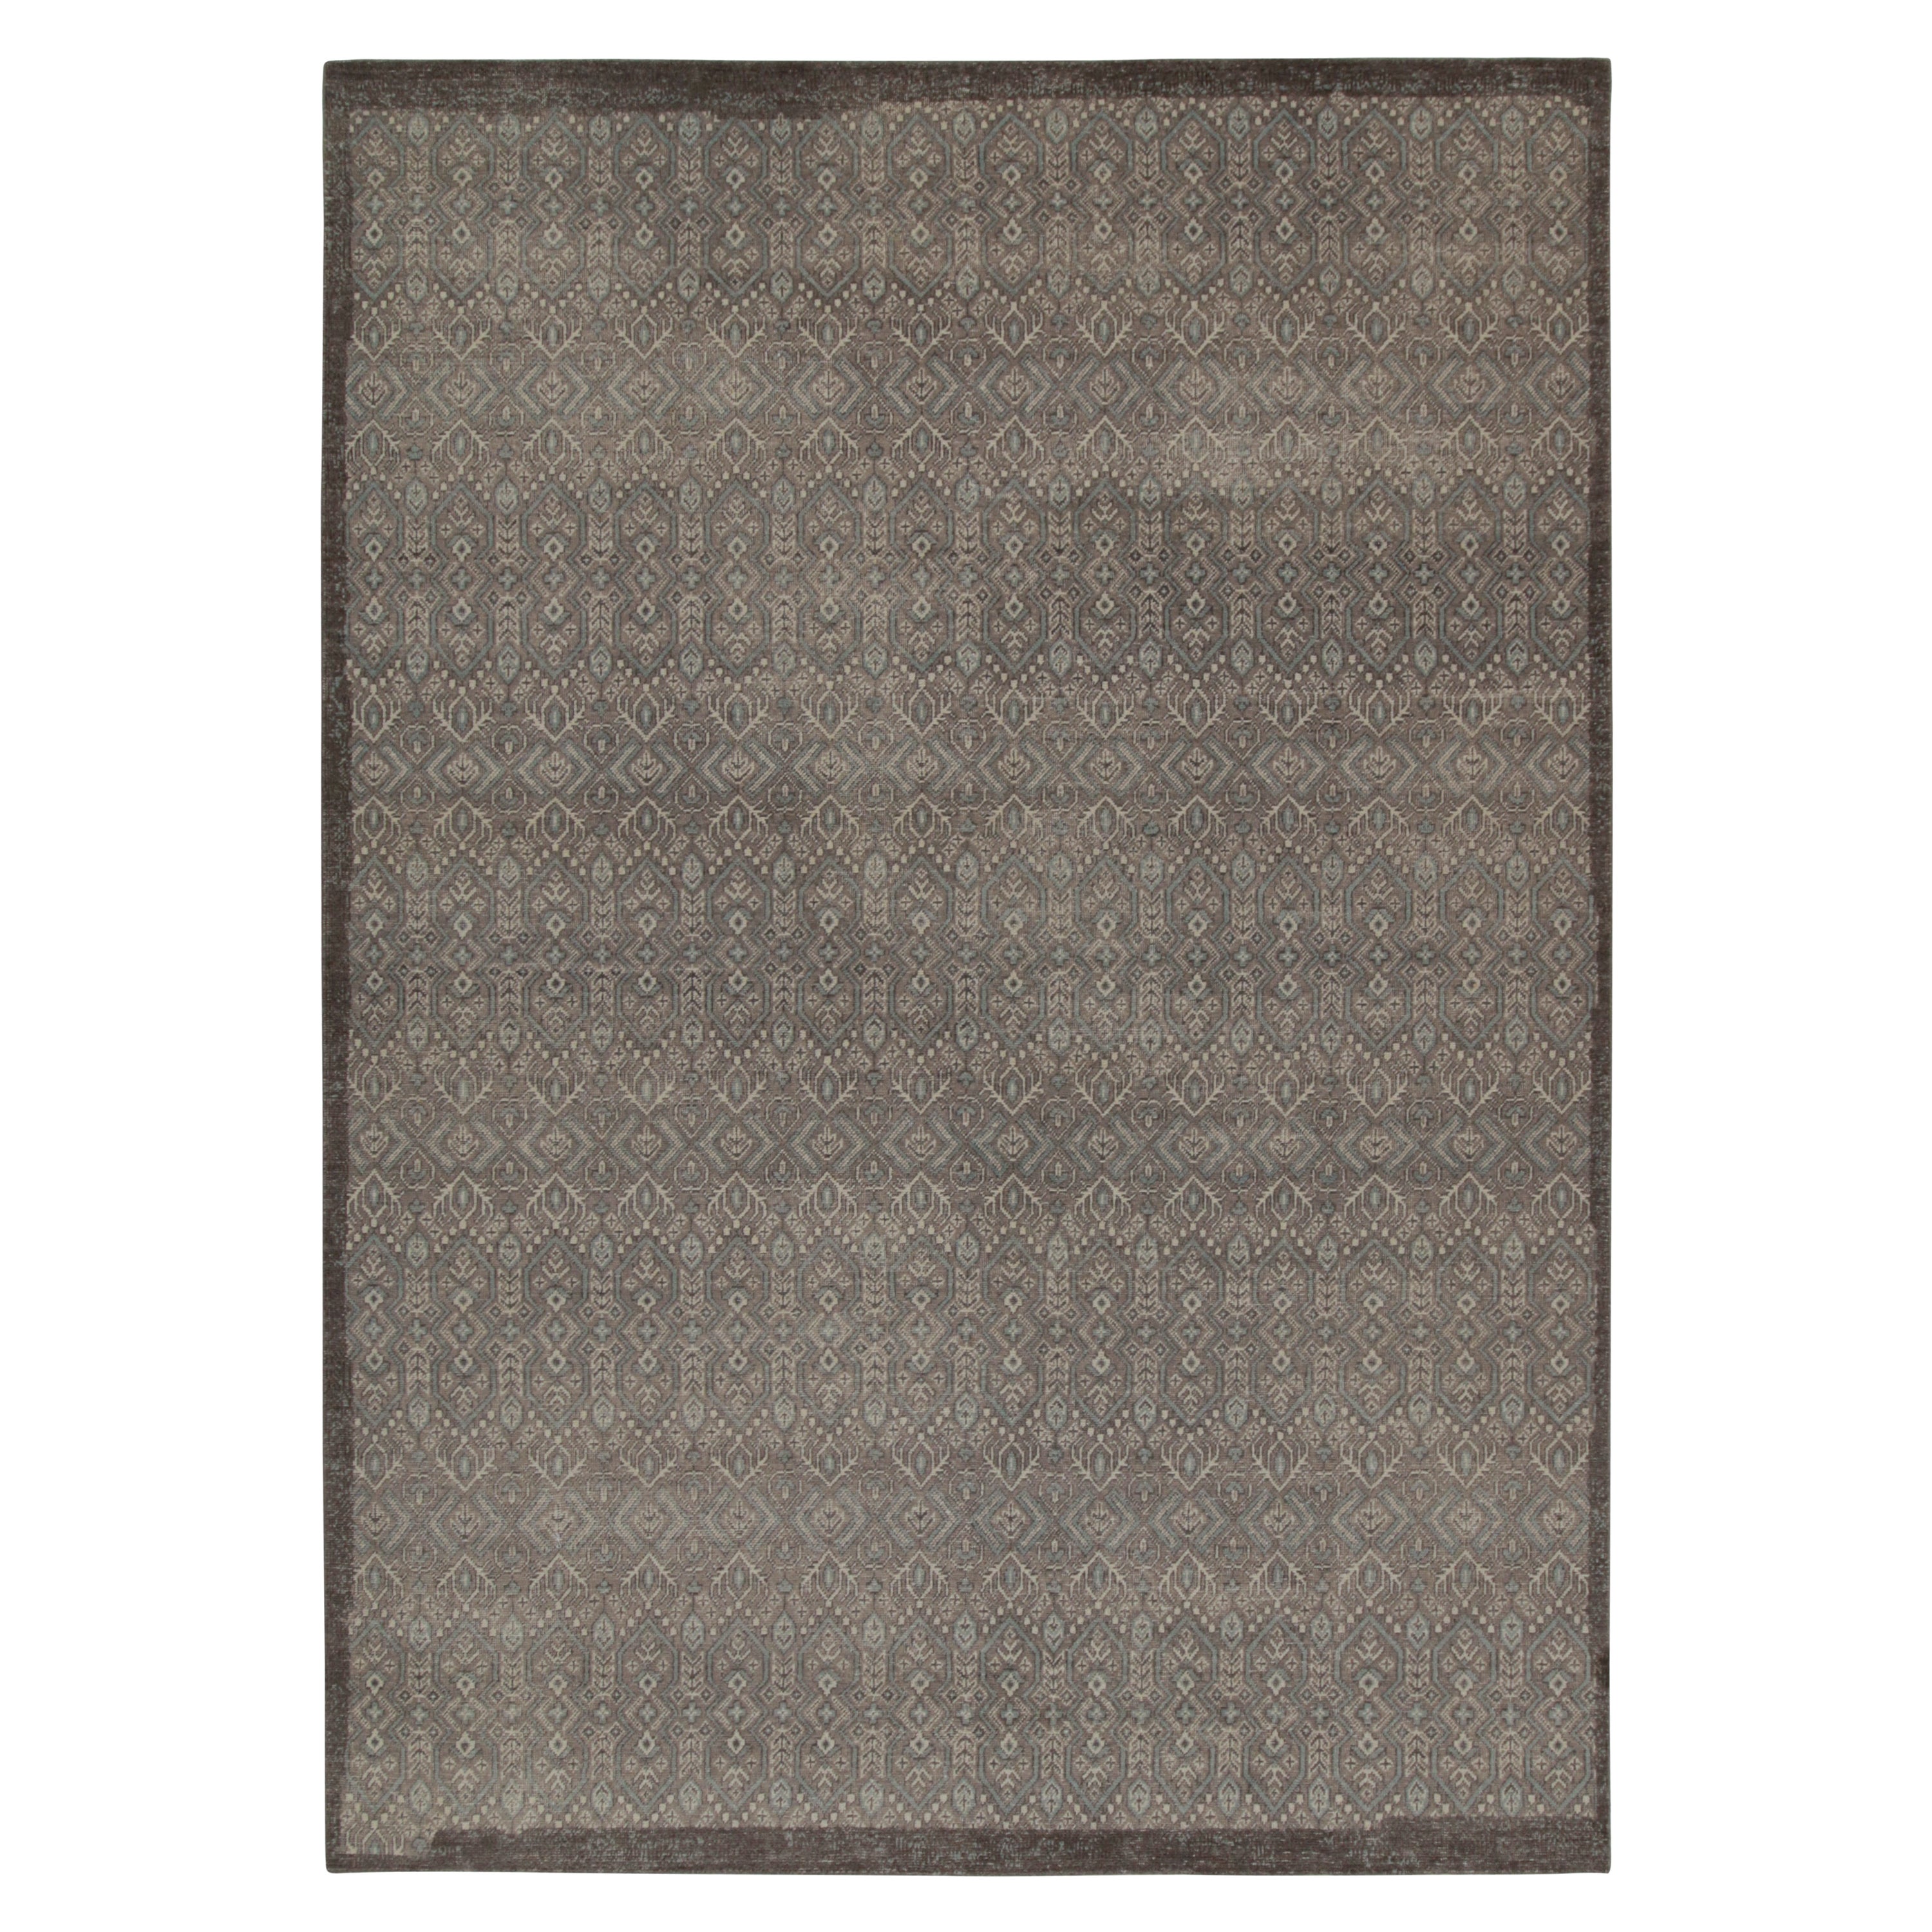 Rug & Kilim’s Distressed Tribal style rug in Gray and Blue Geometric Patterns